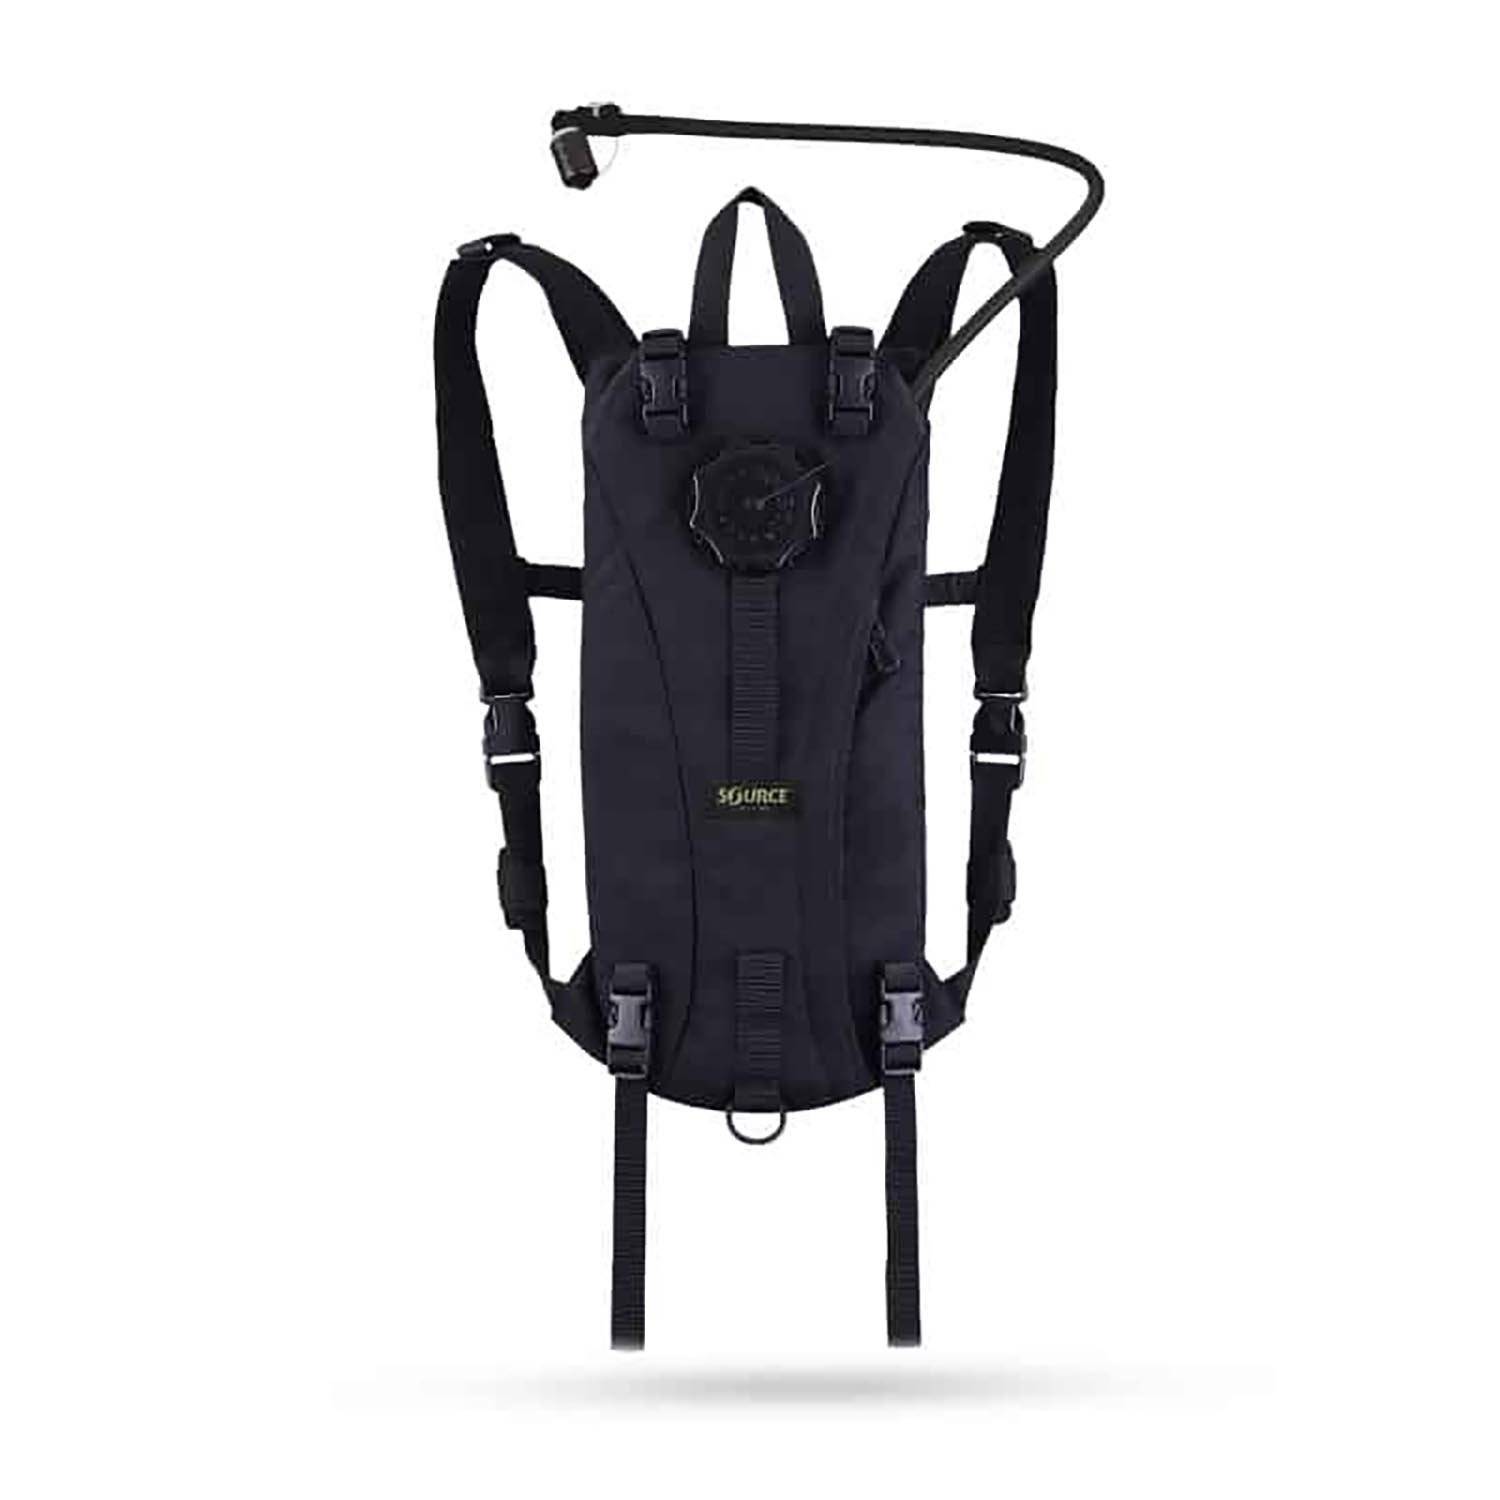 SOURCE TACTICAL 3L HYDRATION PACK